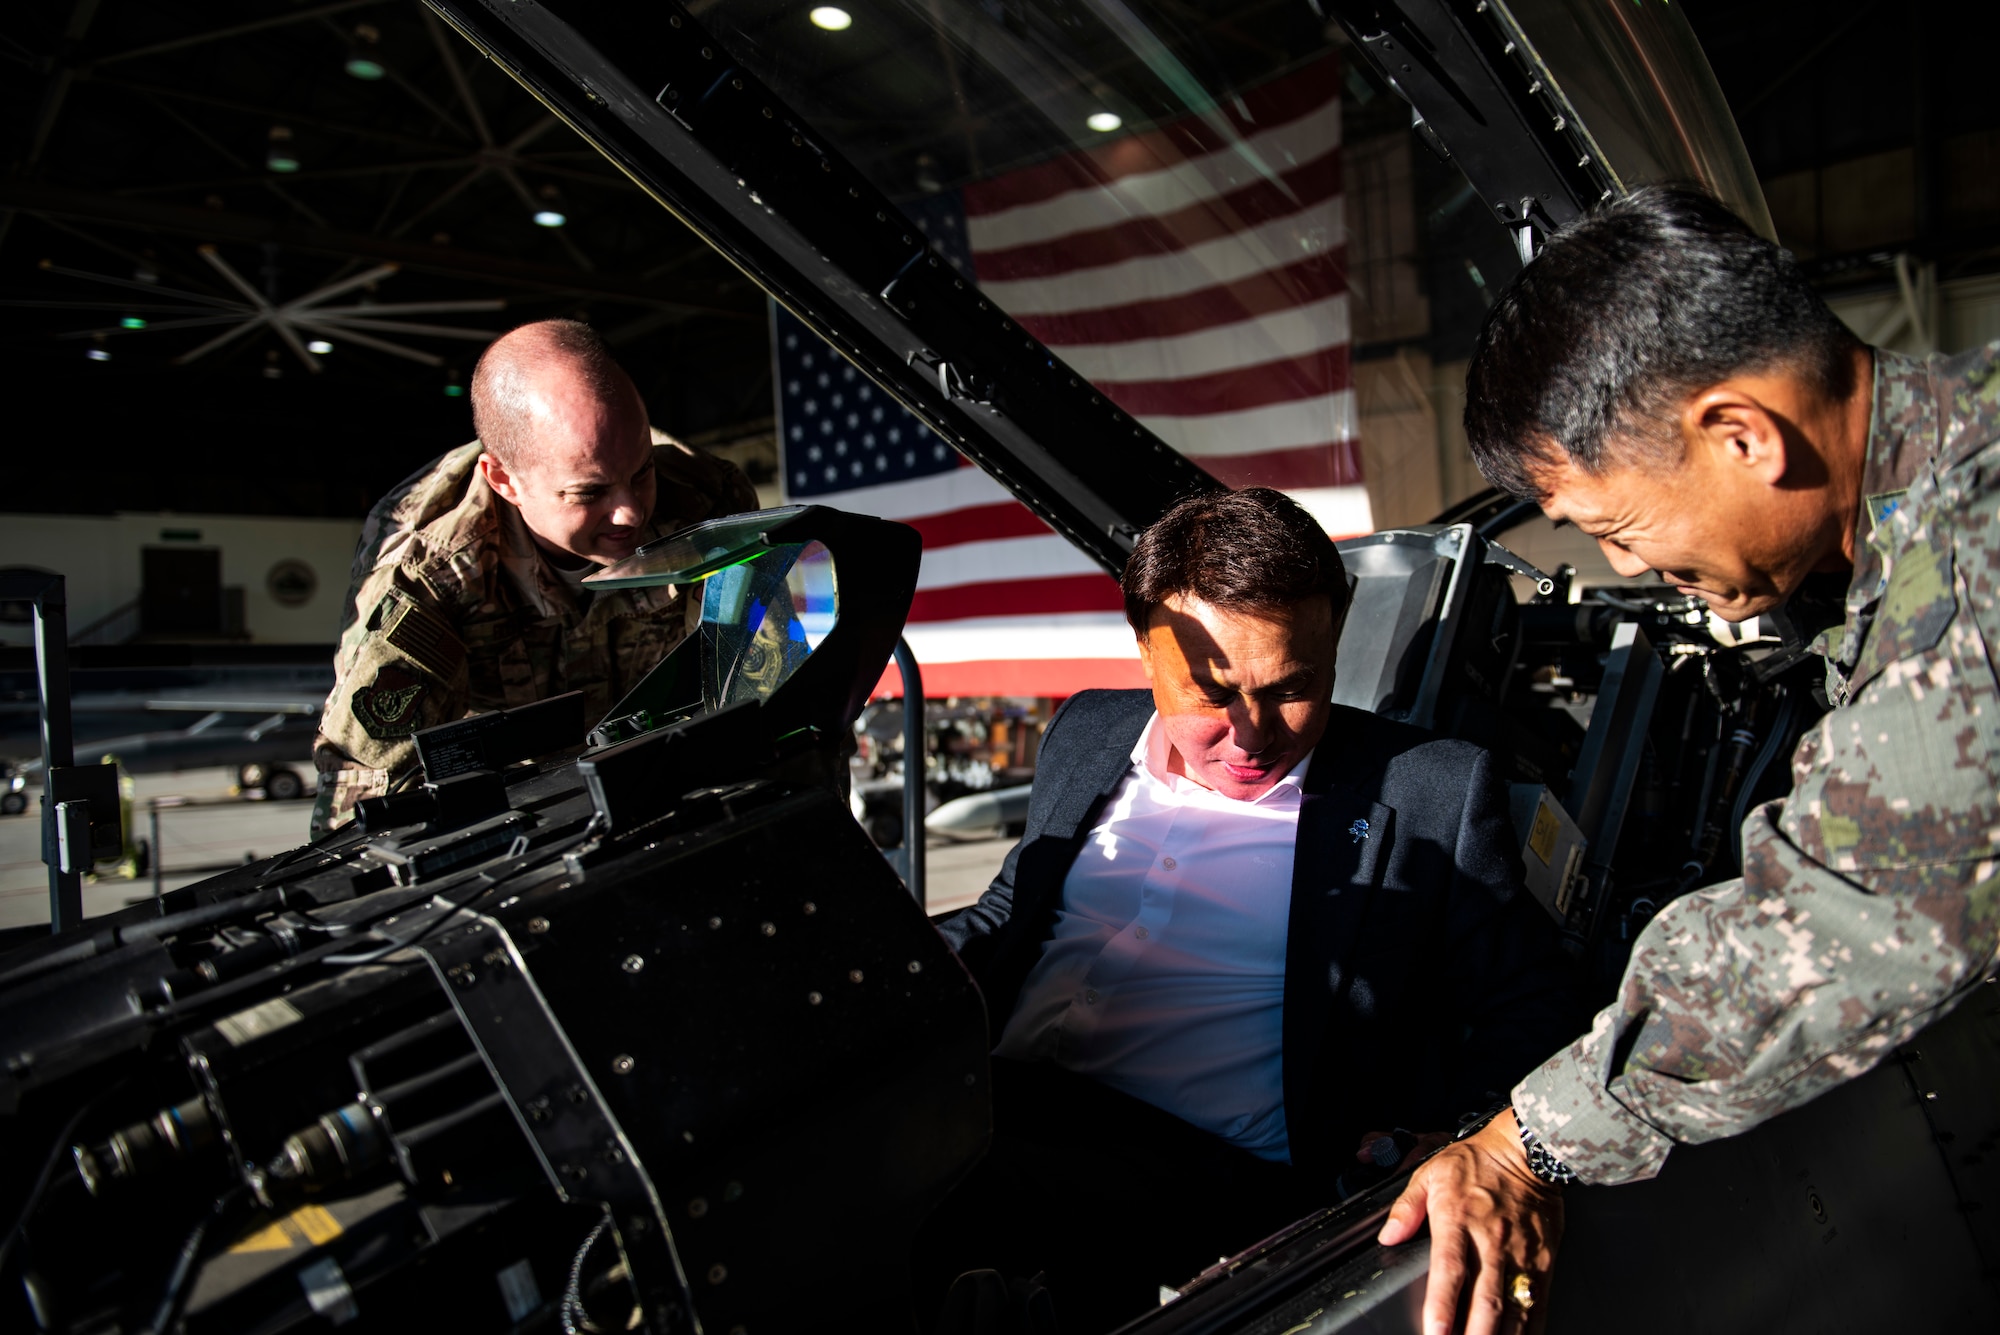 Col. John Bosone, 8th Fighter Wing commander (left) and Col. Jae-Gyun Jeon, 38th Fighter Group commander (right) seat Kang Imjune, Mayor of Gunsan (middle) in an F-16 Fighting Falcon at Kunsan Air Base, Republic of Korea. Mayor Imjune was shown the different ways Kunsan AB contributes to the overall safety and security of the Korean Peninsula with the help of Republic of Korea Air Force partners. (U.S. Air Force photo by Senior Airman Stefan Alvarez)